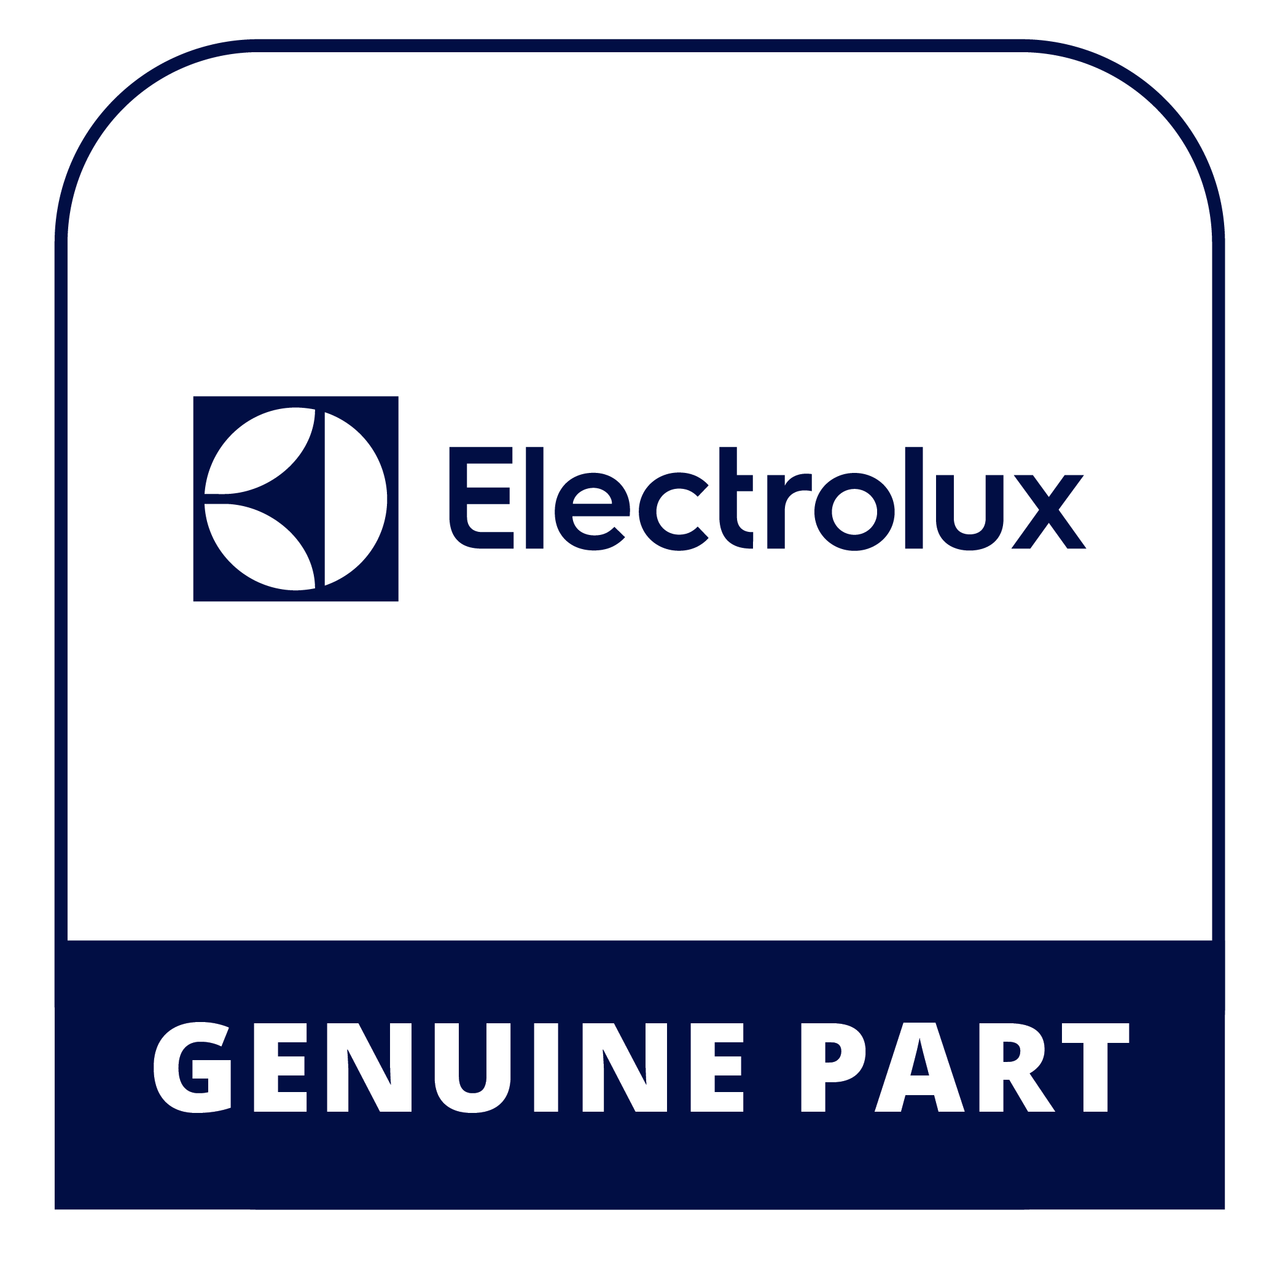 Frigidaire - Electrolux 134914900 Use & Care Guide - Genuine Electrolux Part